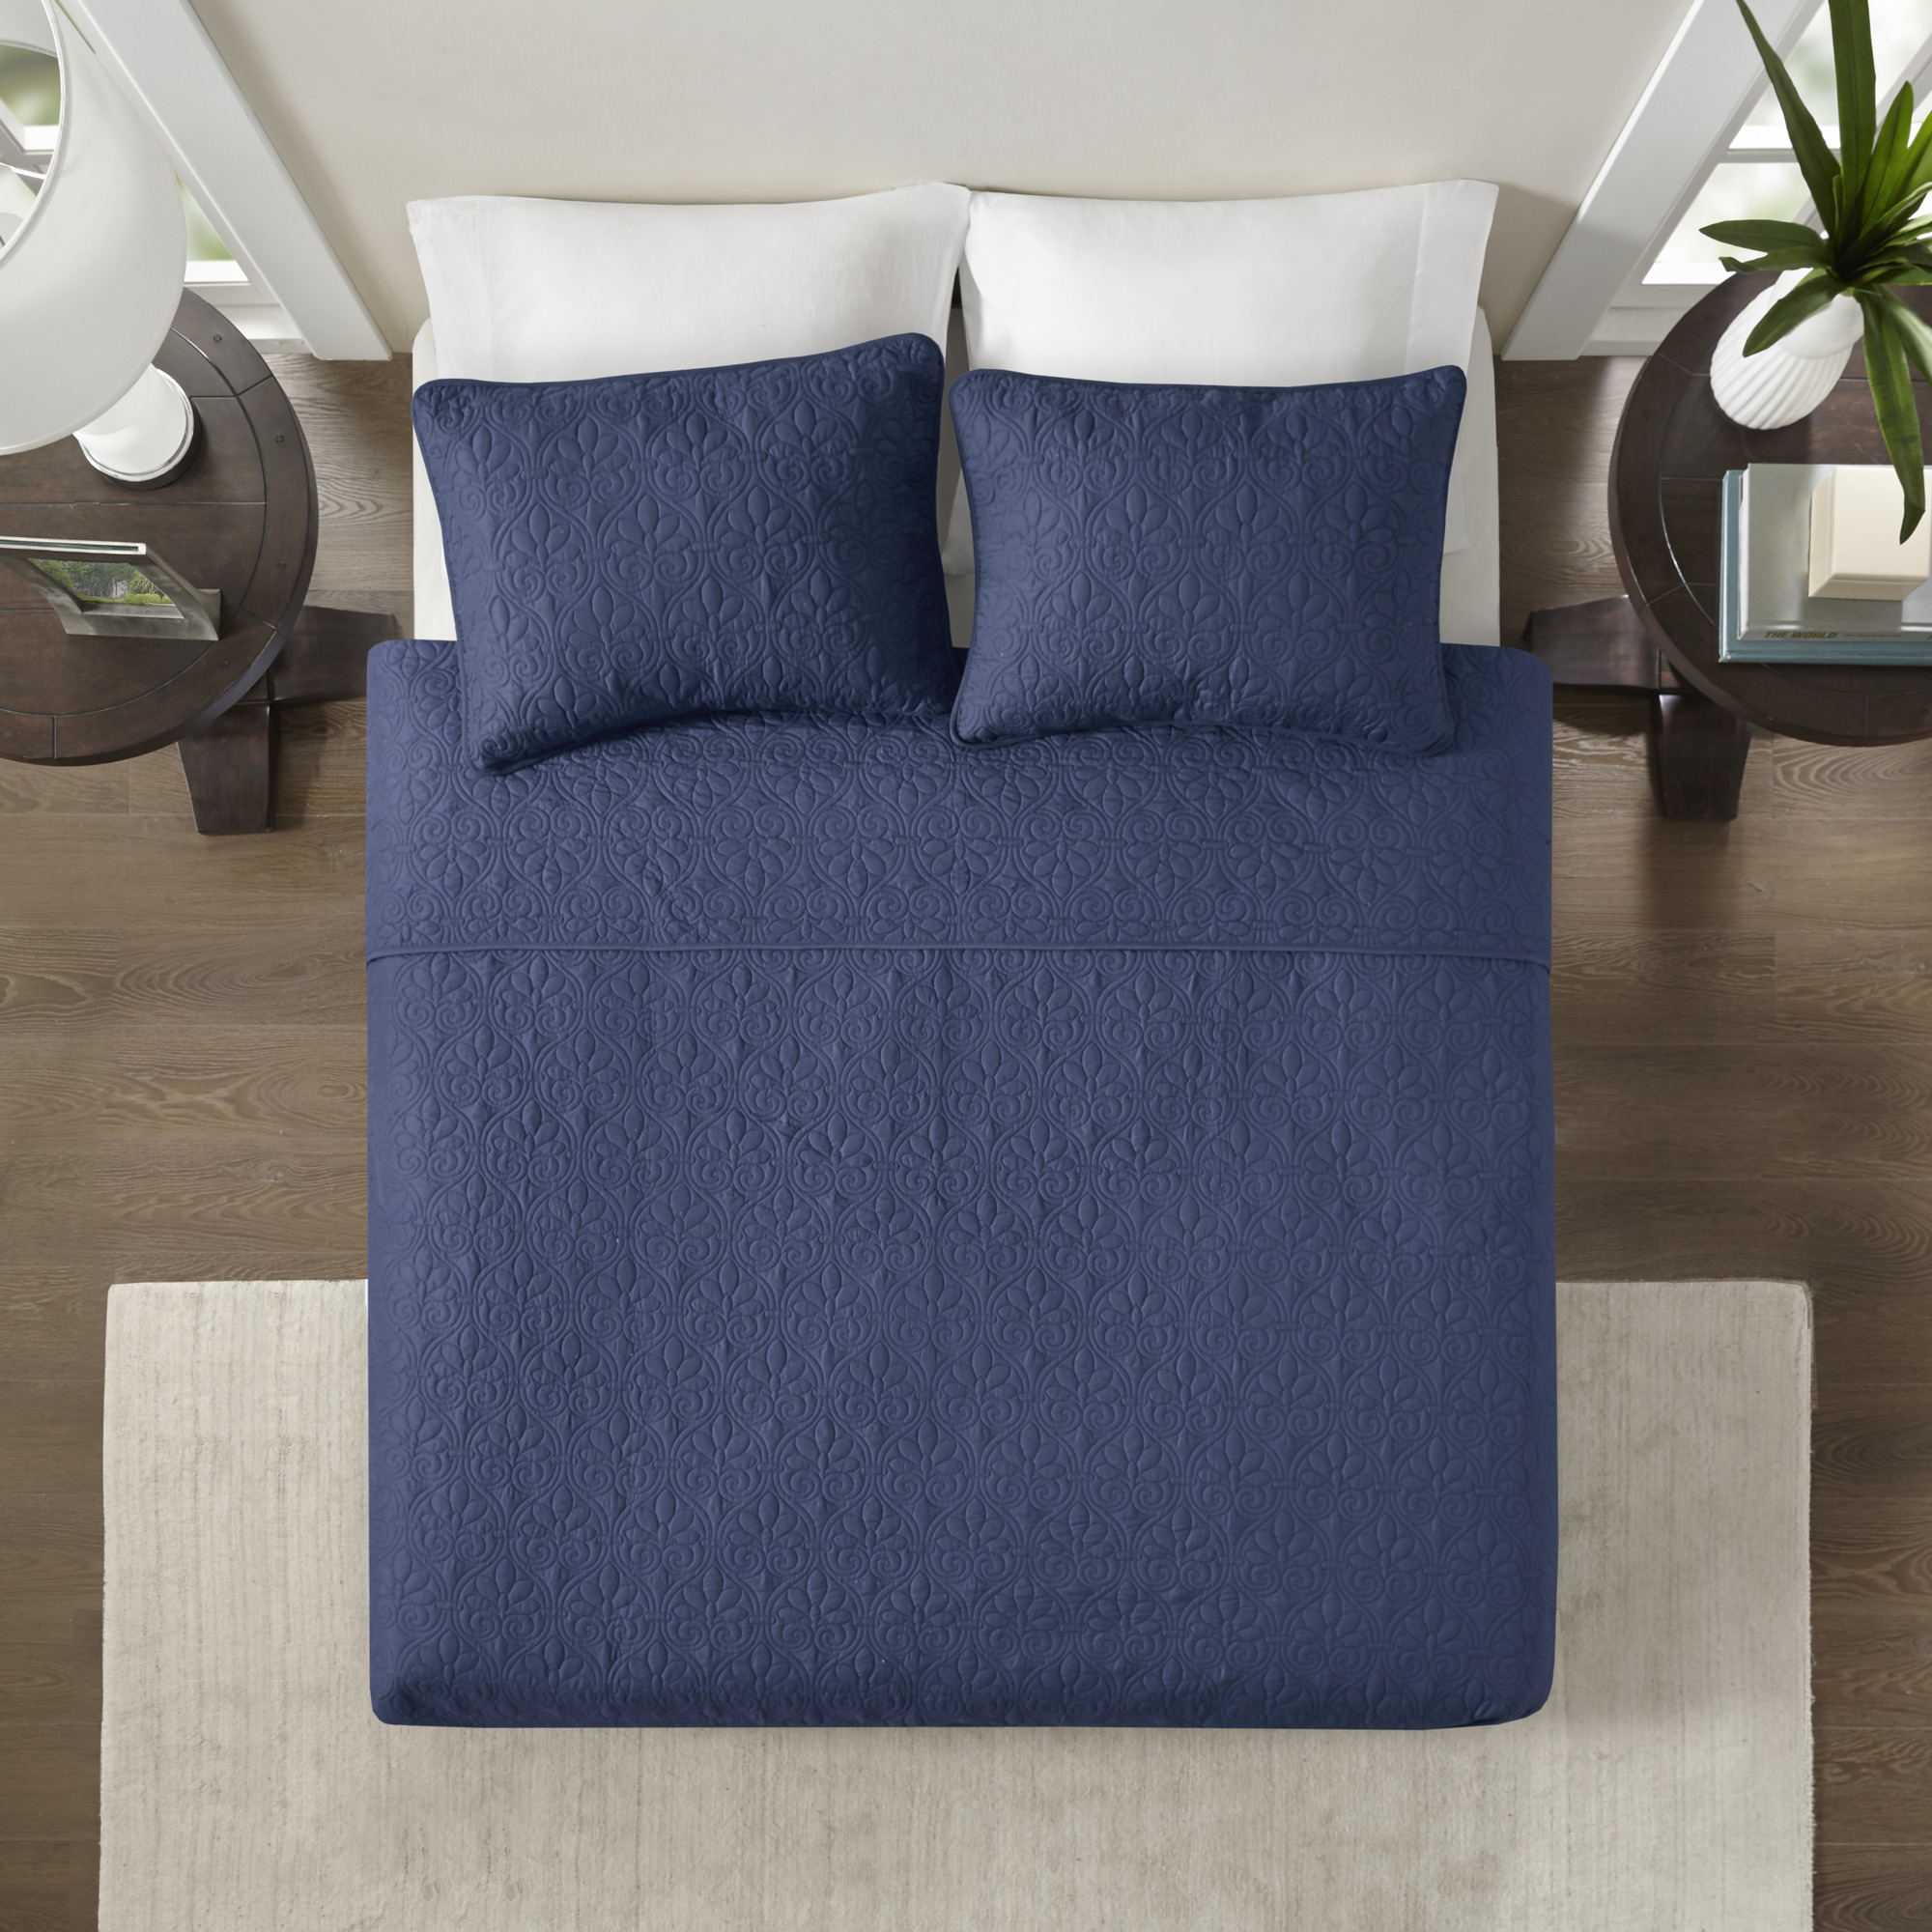 Home Essence Vancouver Super Soft Reversible Coverlet Set, Full/Queen, Navy - image 5 of 13